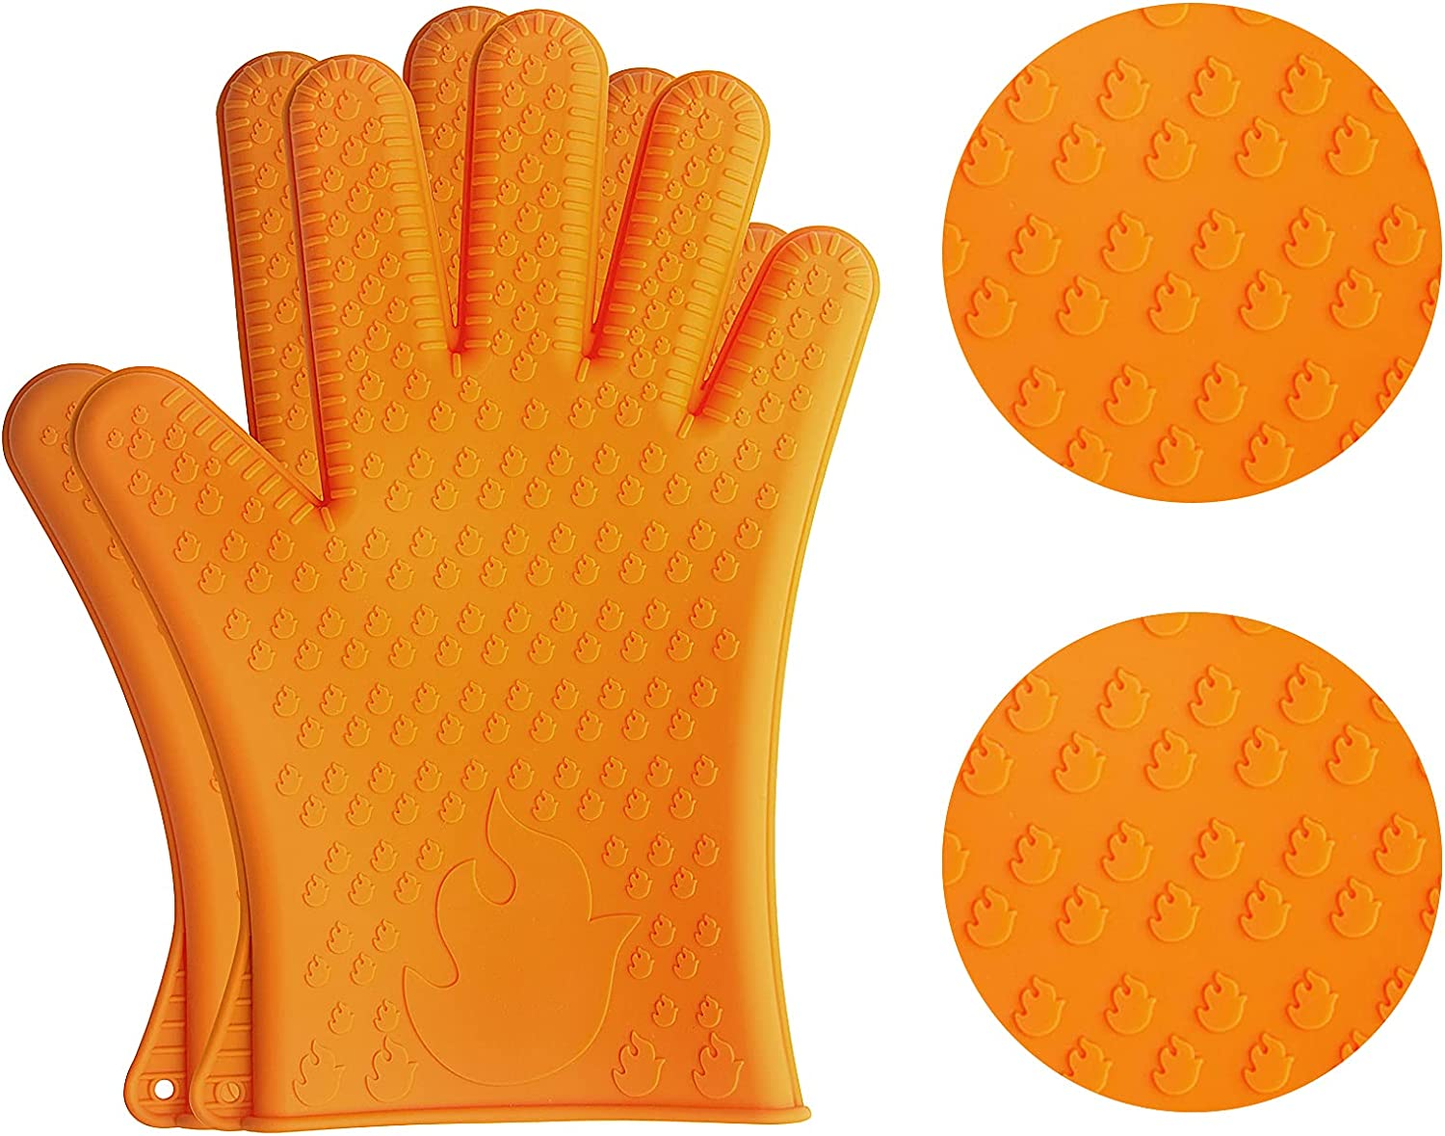 B.B.Q Silicone Smoker Oven Gloves-Bbq Grill Accessories,Extreme Heat Resistant ,Food Grade Kitchen Oven Mitts /Non-Slip Silicone Surface